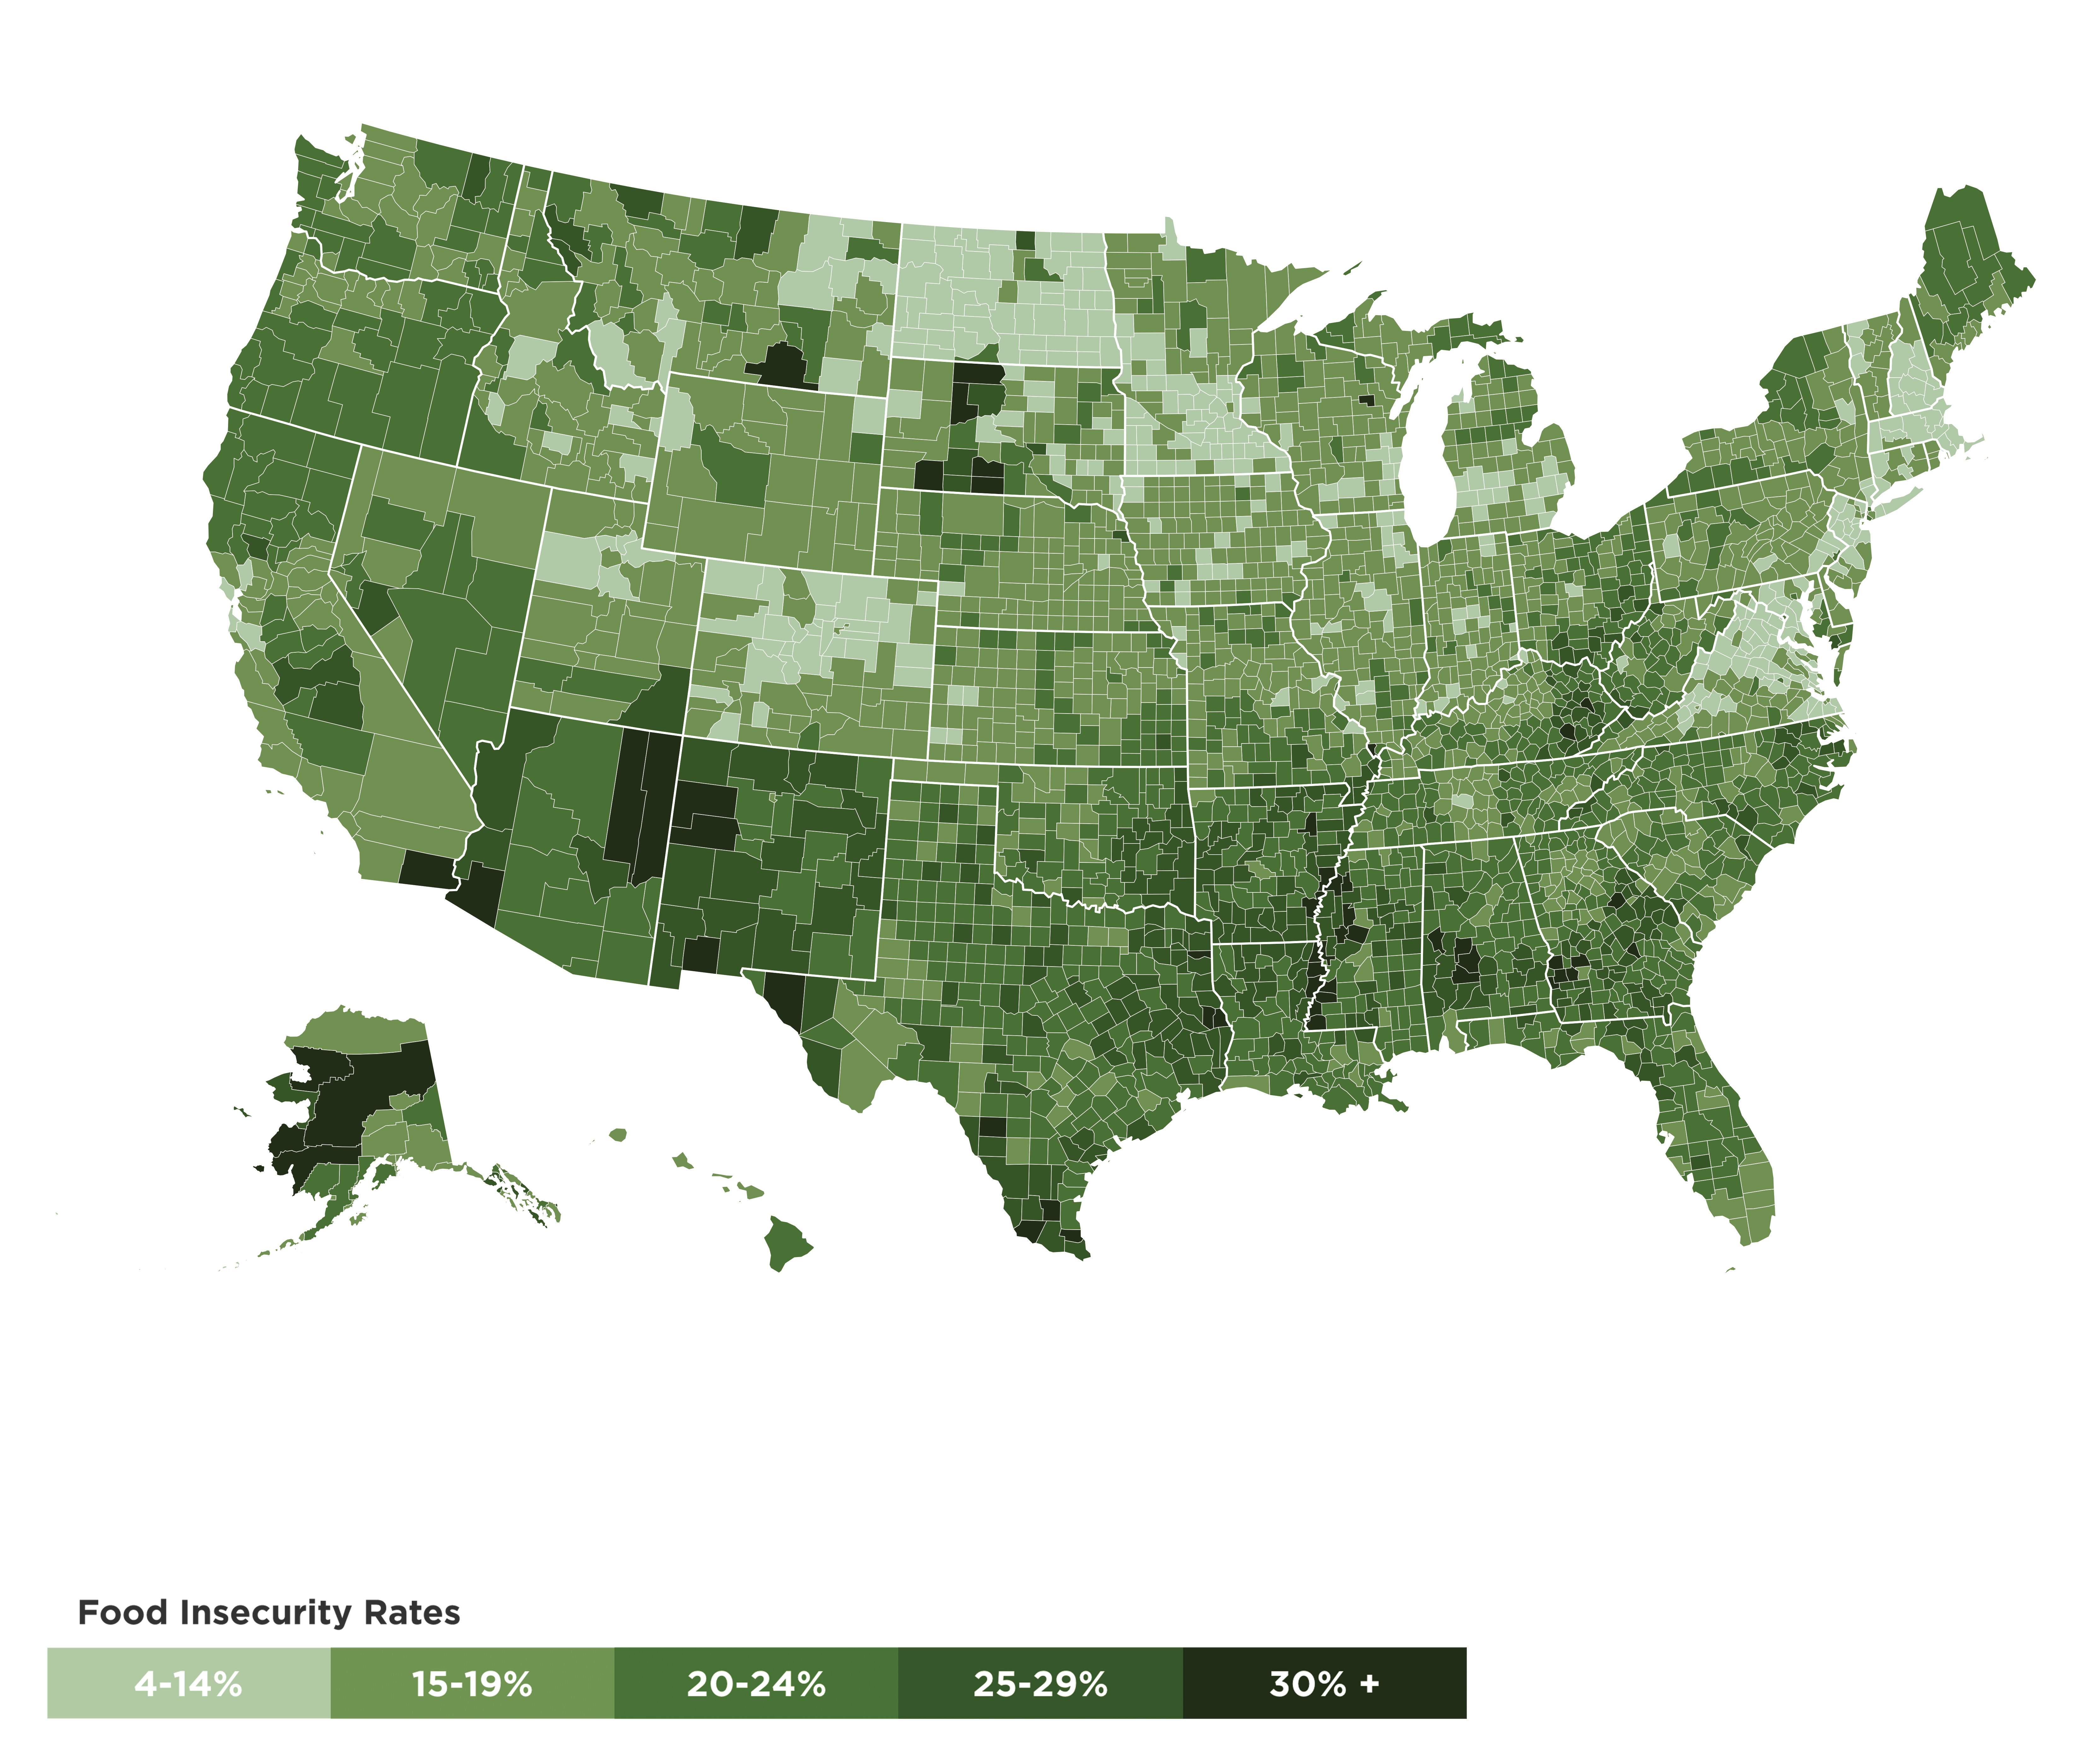 Food Insecurity Rates by County